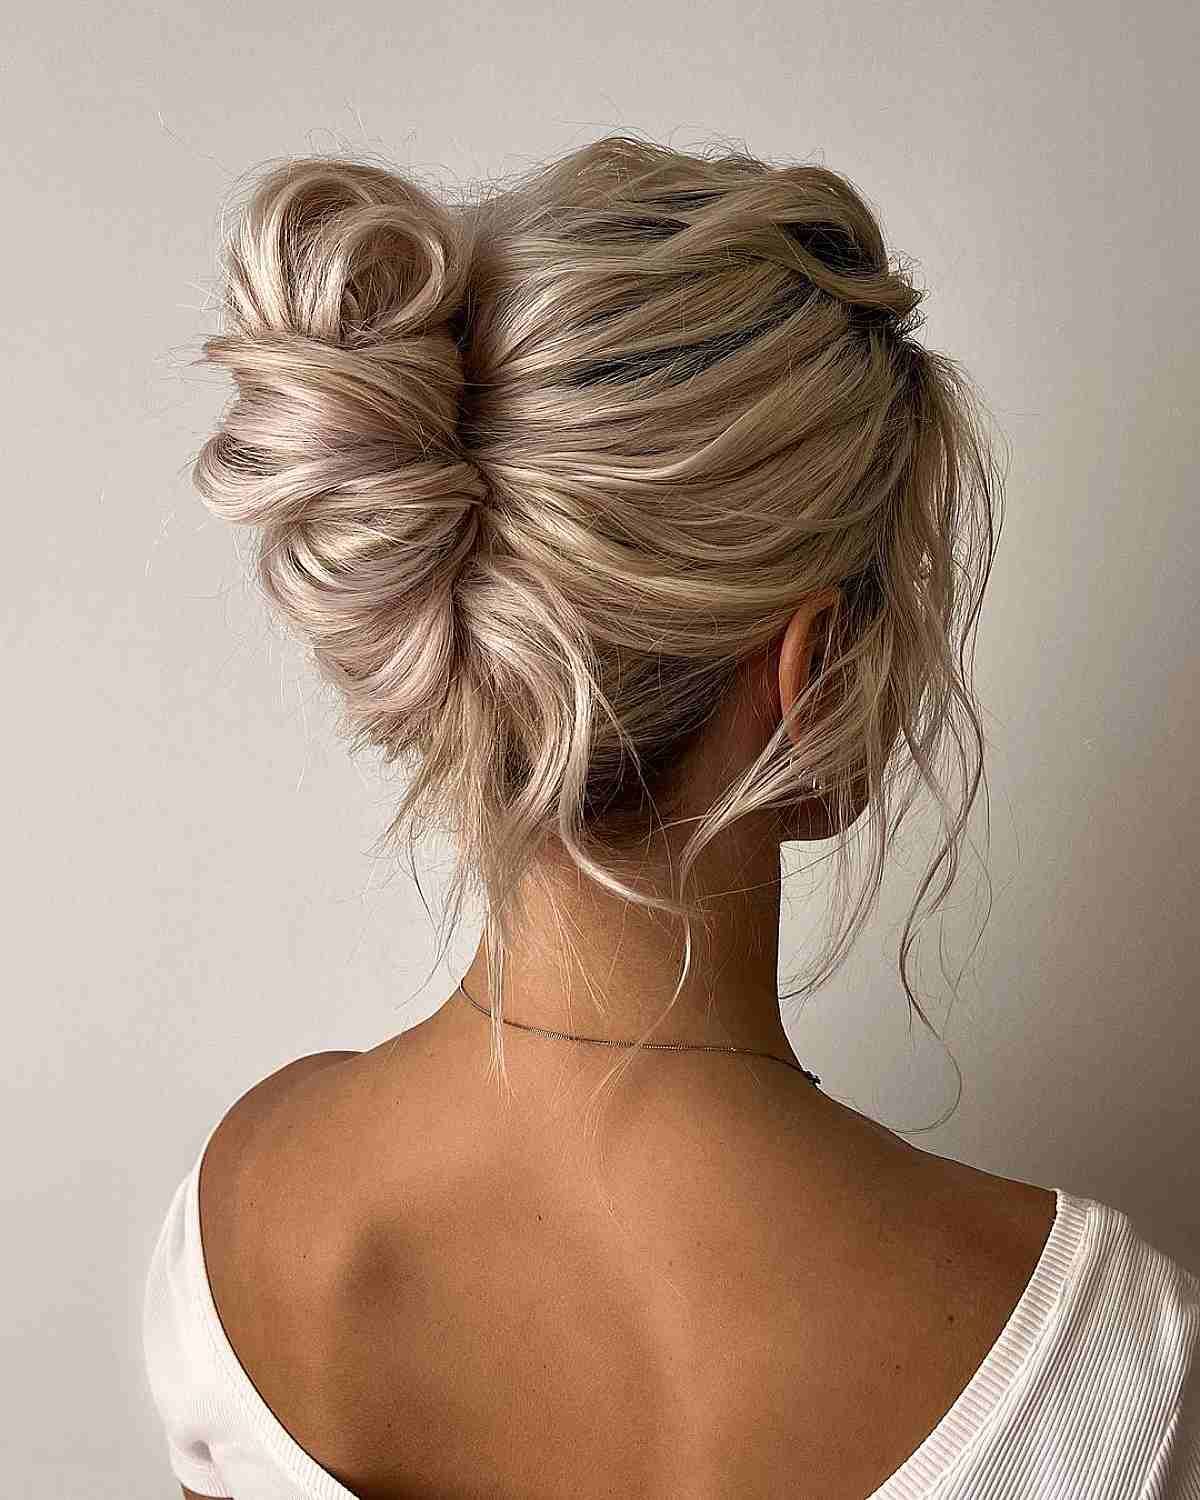 Simple Updo Hairstyles for Any Occasion